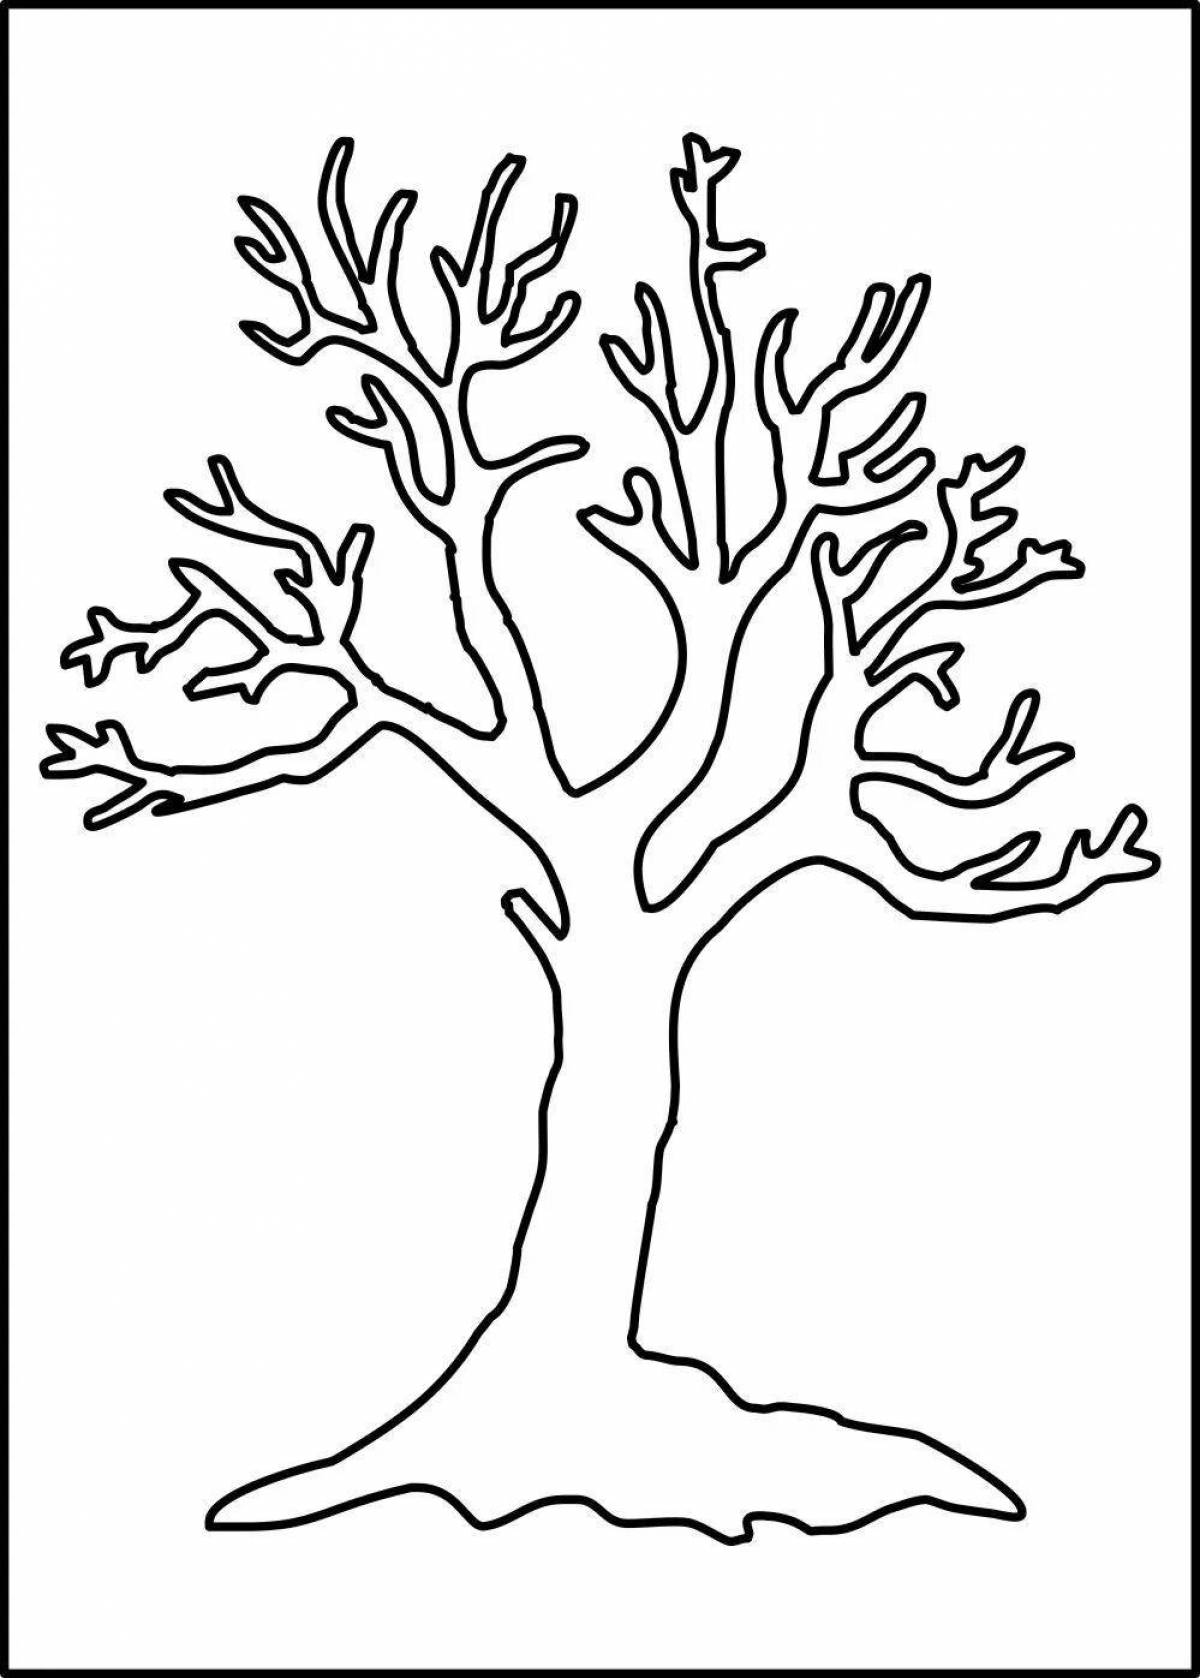 Colorful winter tree coloring page for 3-4 year olds